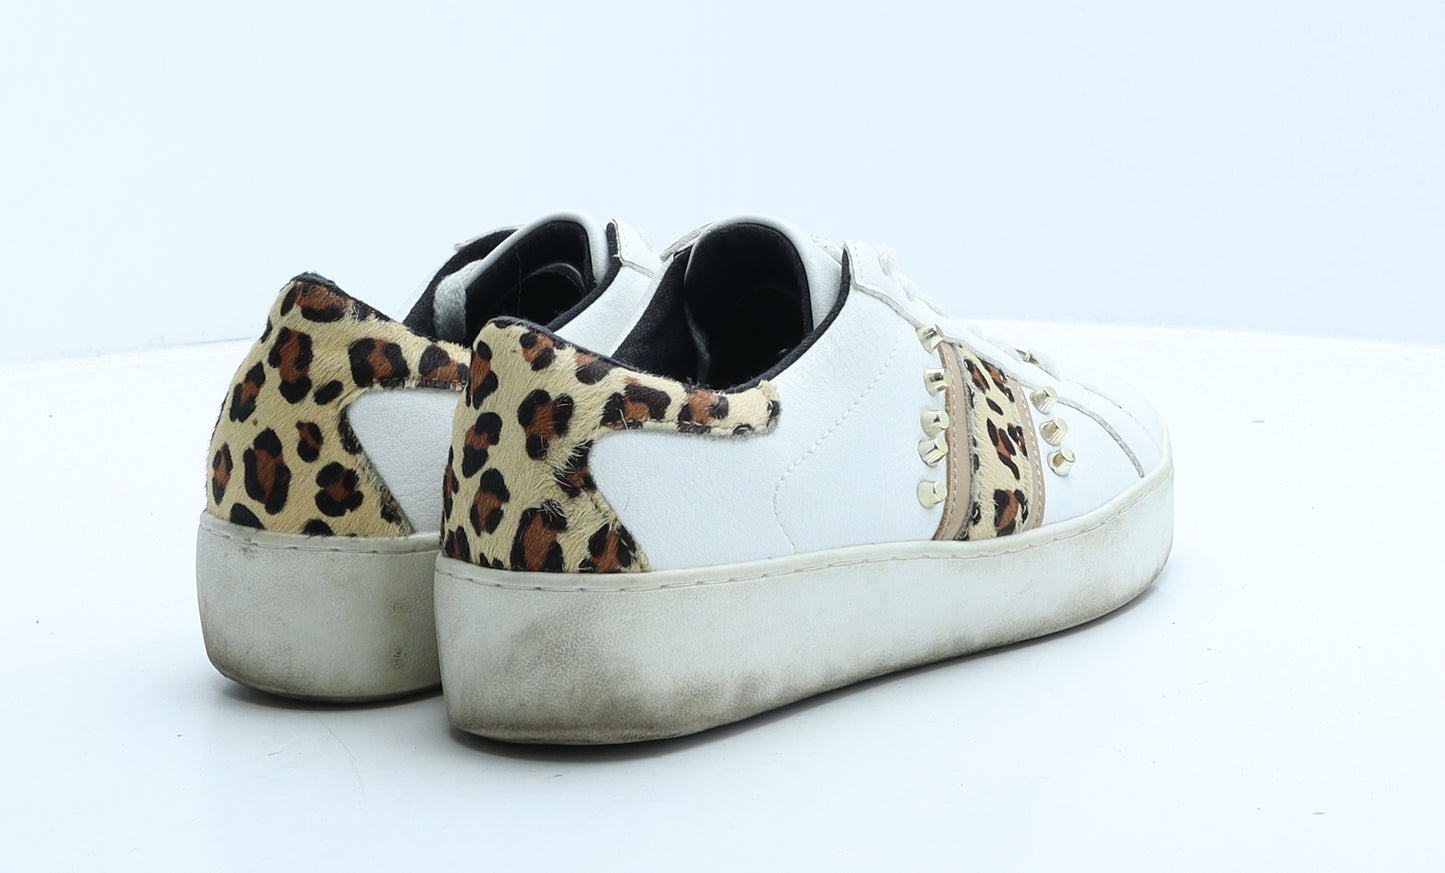 River Island Womens White Animal Print Leather Trainer Casual UK 6 39 - Leopard Print